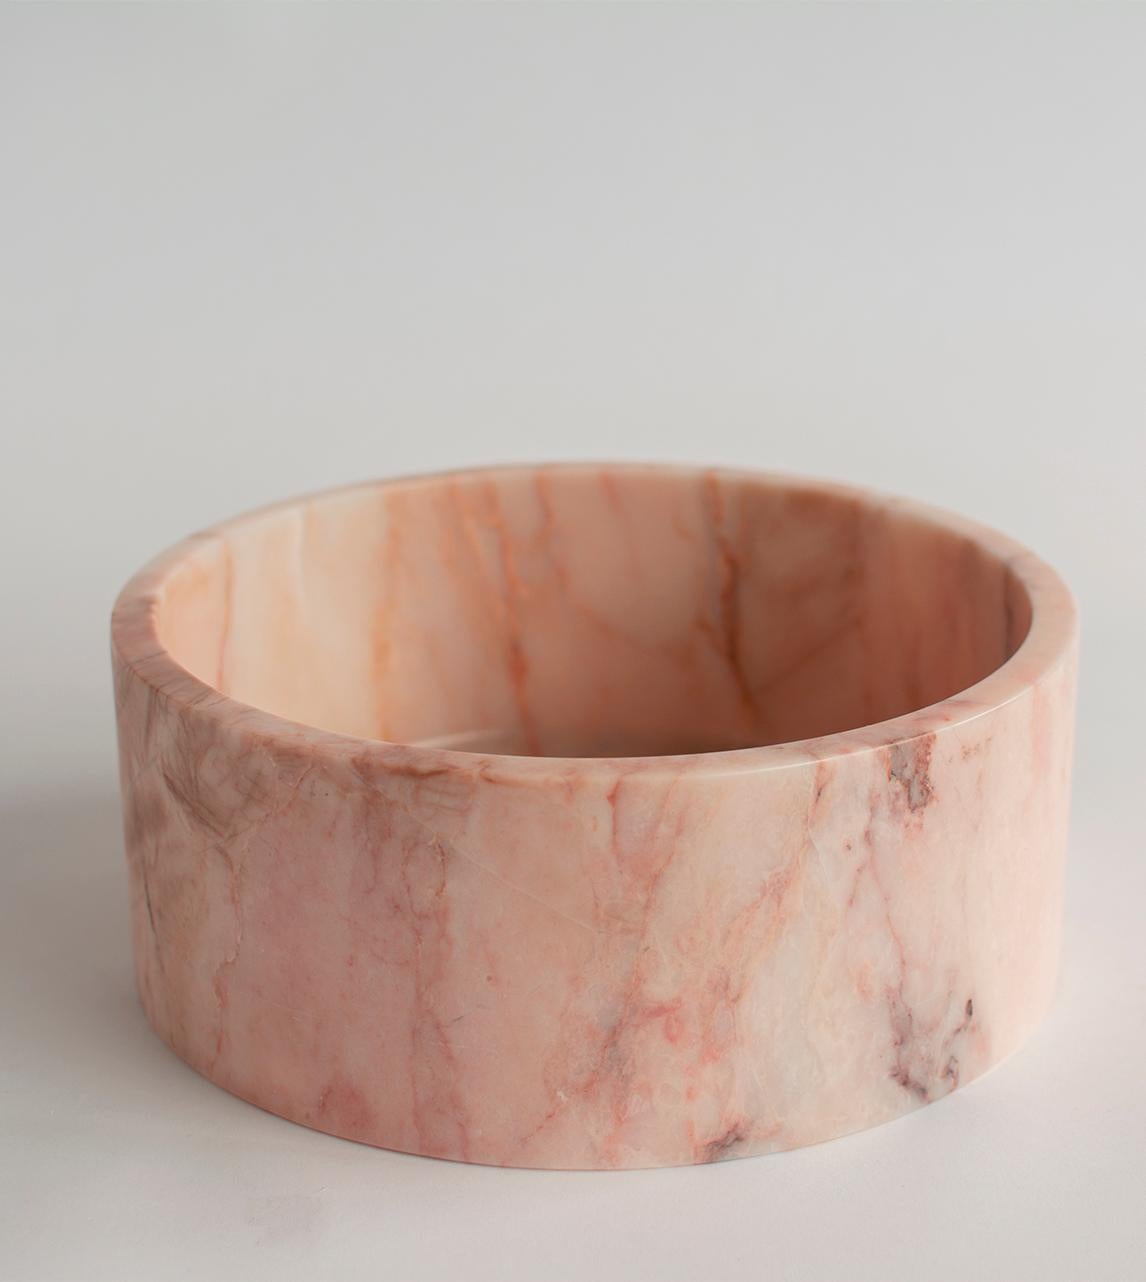 This substantial pink marble bowl is beautifully handcrafted from a single piece of genuine Turkish Black Marble and honed for a silky mat finish. 

There may be natural variations that are not product flaws, they make your design truly